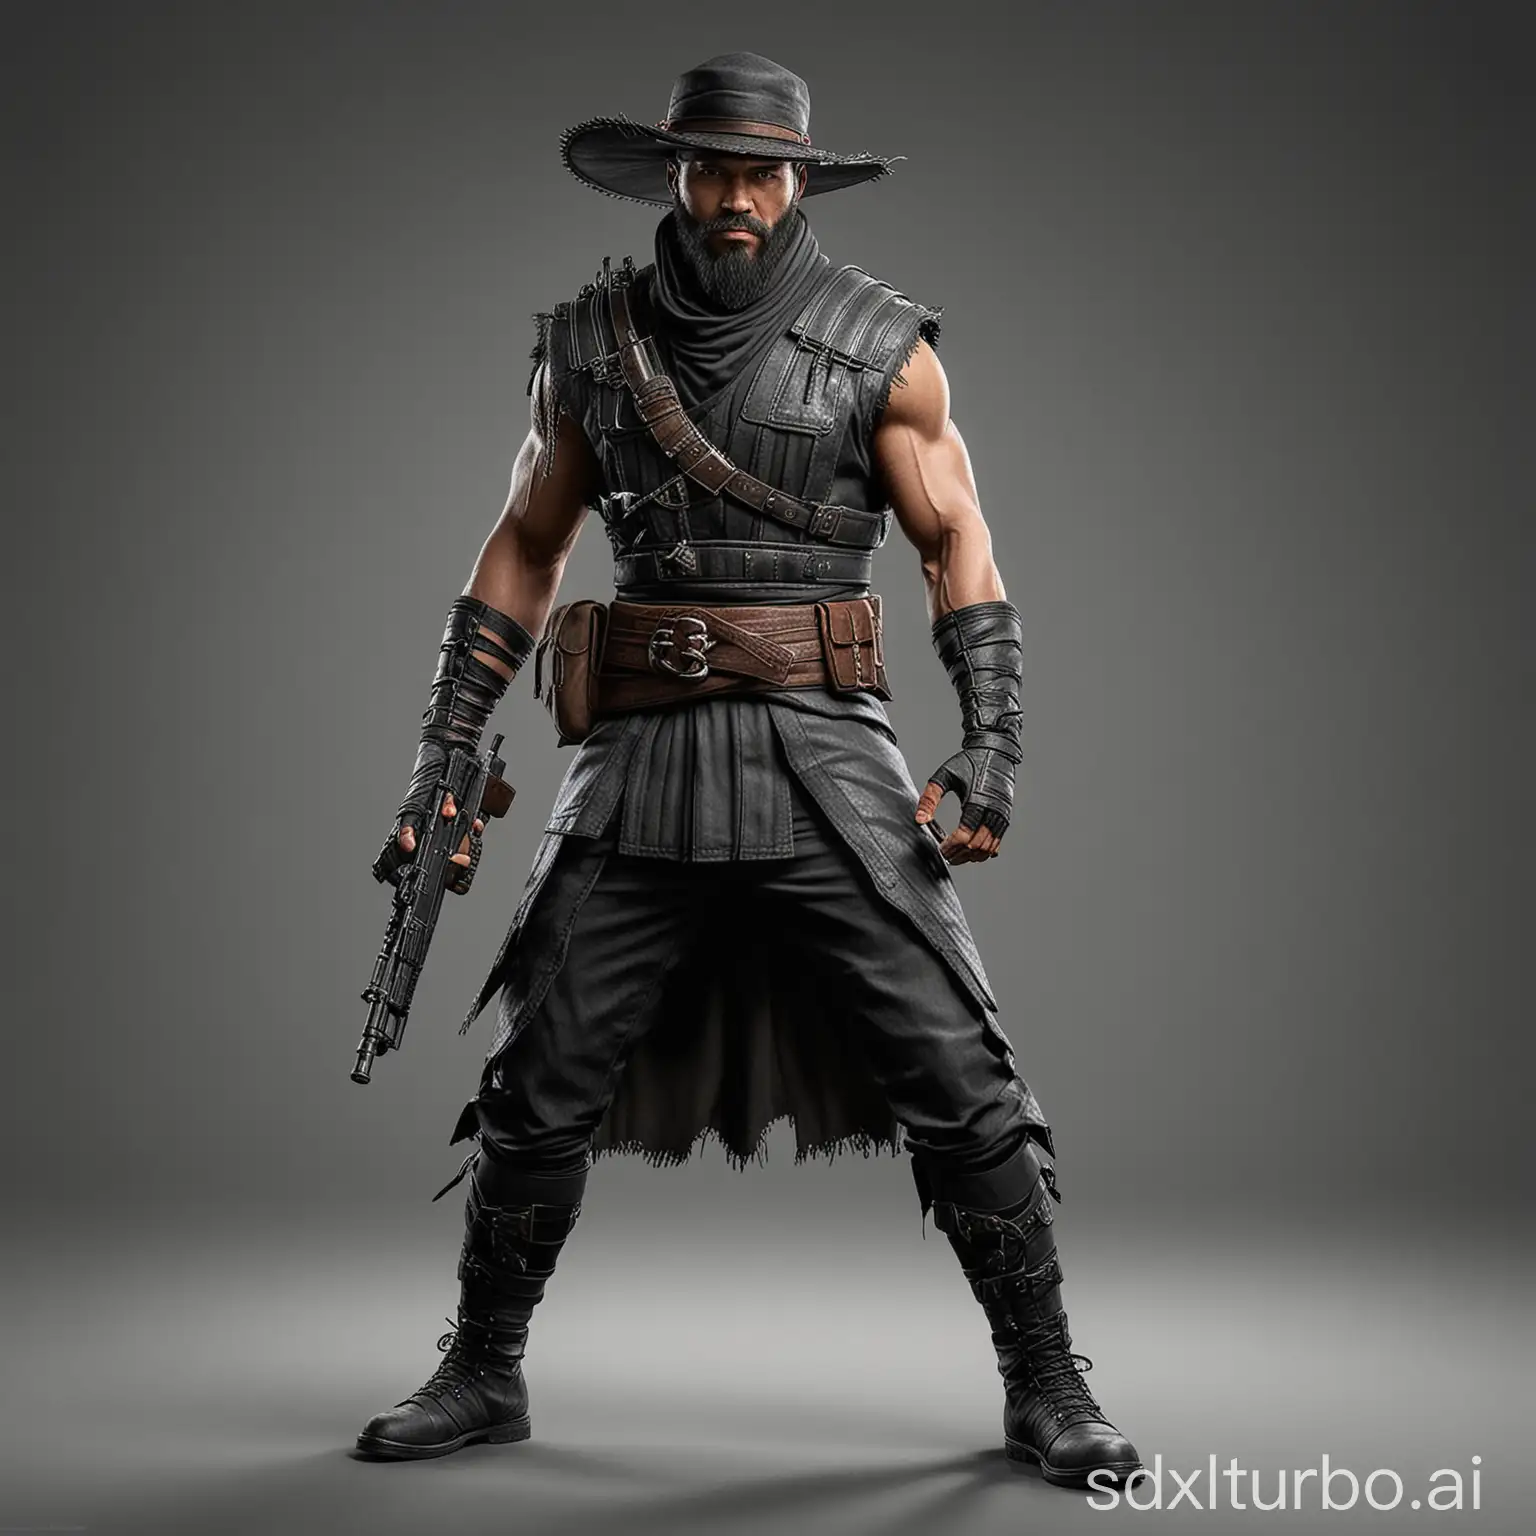 On a plain background is a A bearded kung lao mortal kombat holding an assault rifle PUBG with full armor in a full body portrait. This is a full body photo realistic high resolution image with sharp clean subject focus